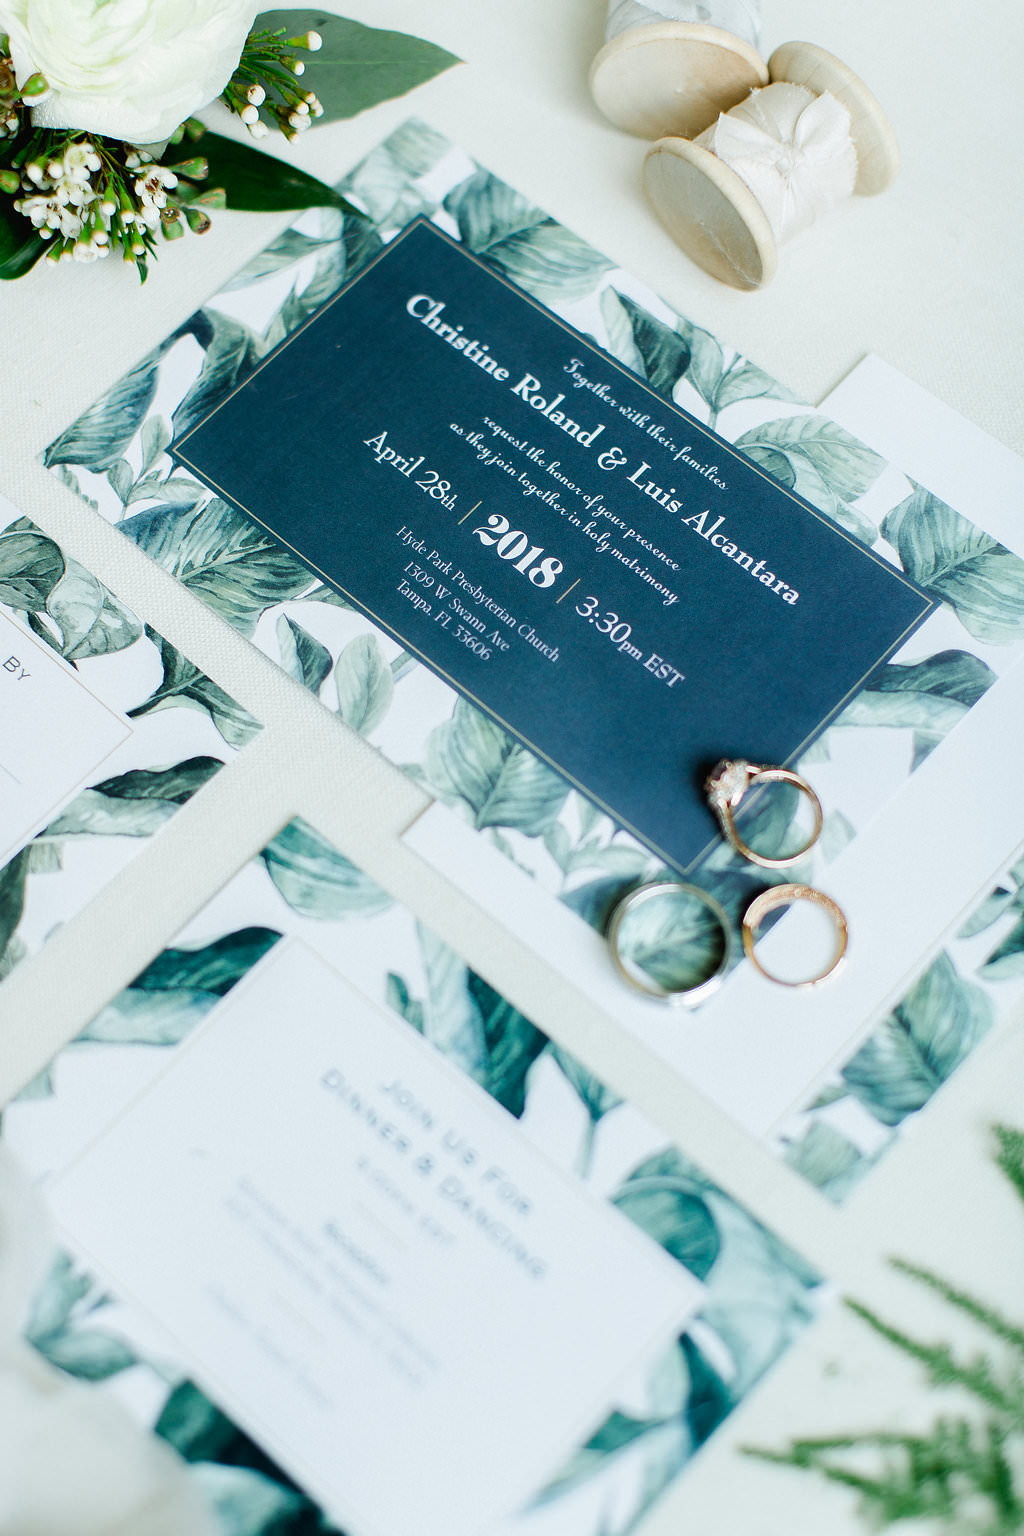 Tropical Floral Inspired Blue, Green and White Wedding Invitation Suite with Bride and Groom Wedding Rings